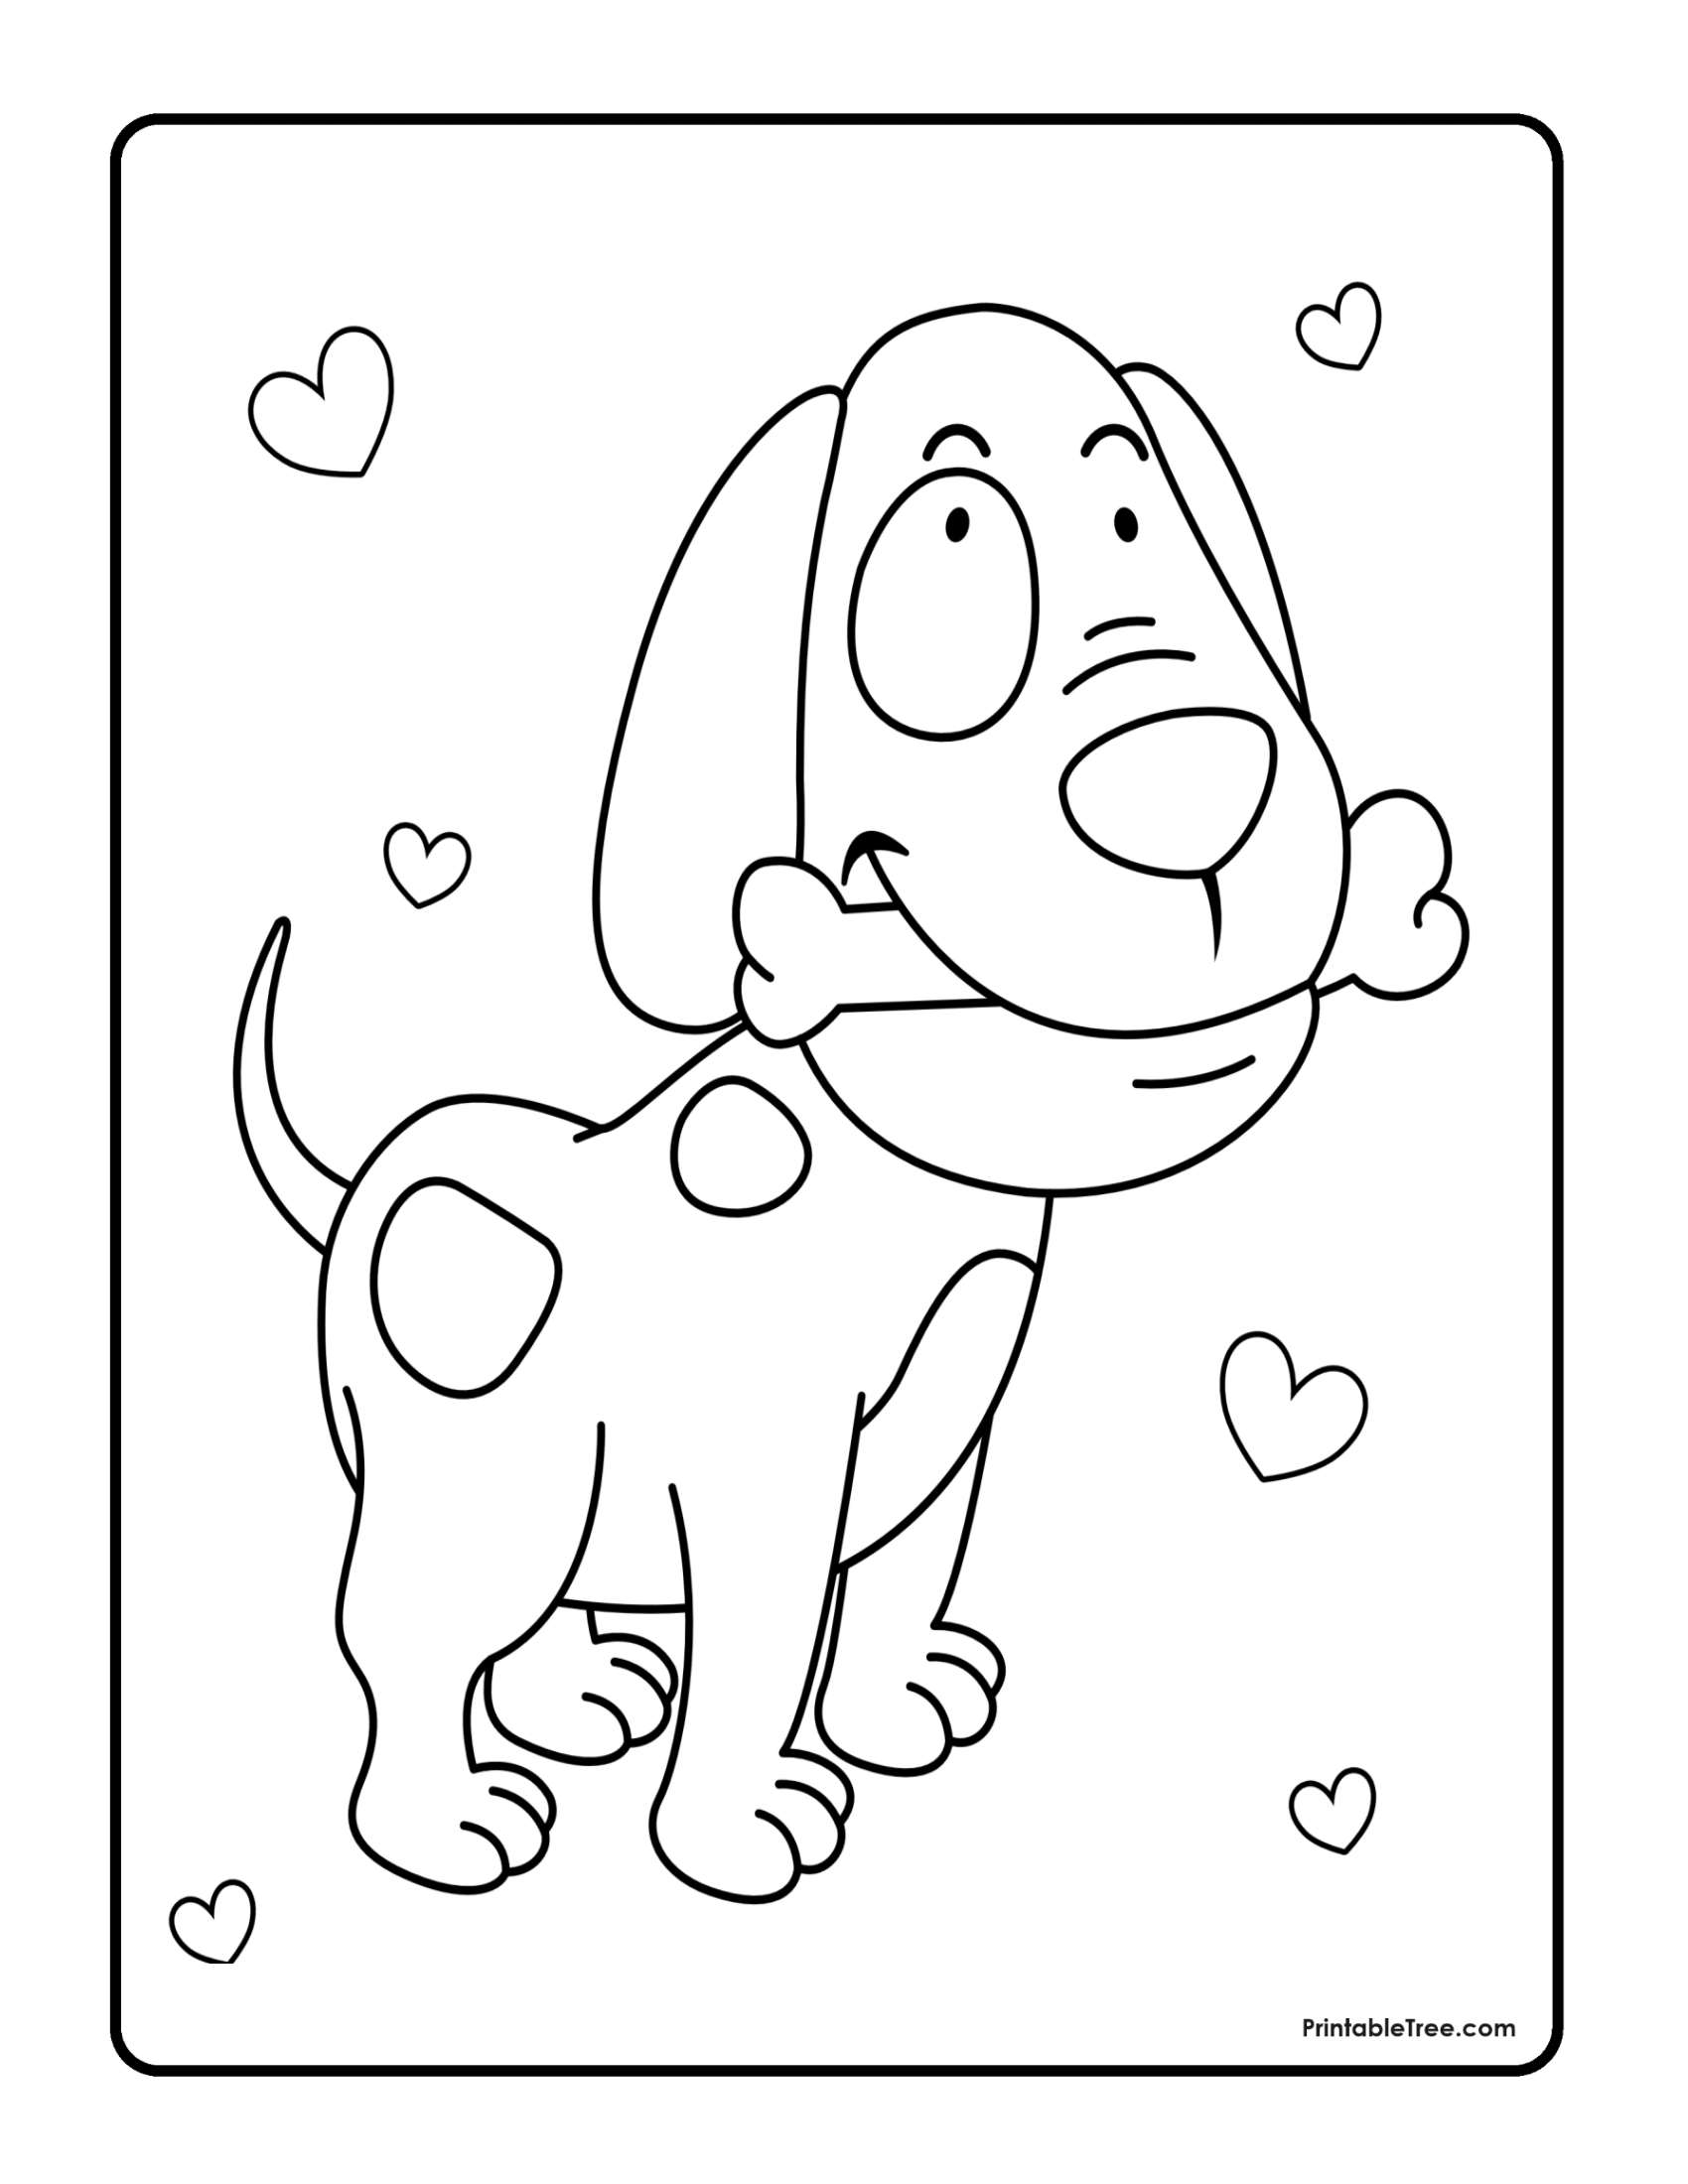 Free printable puppy coloring pages pdf for kids and adults